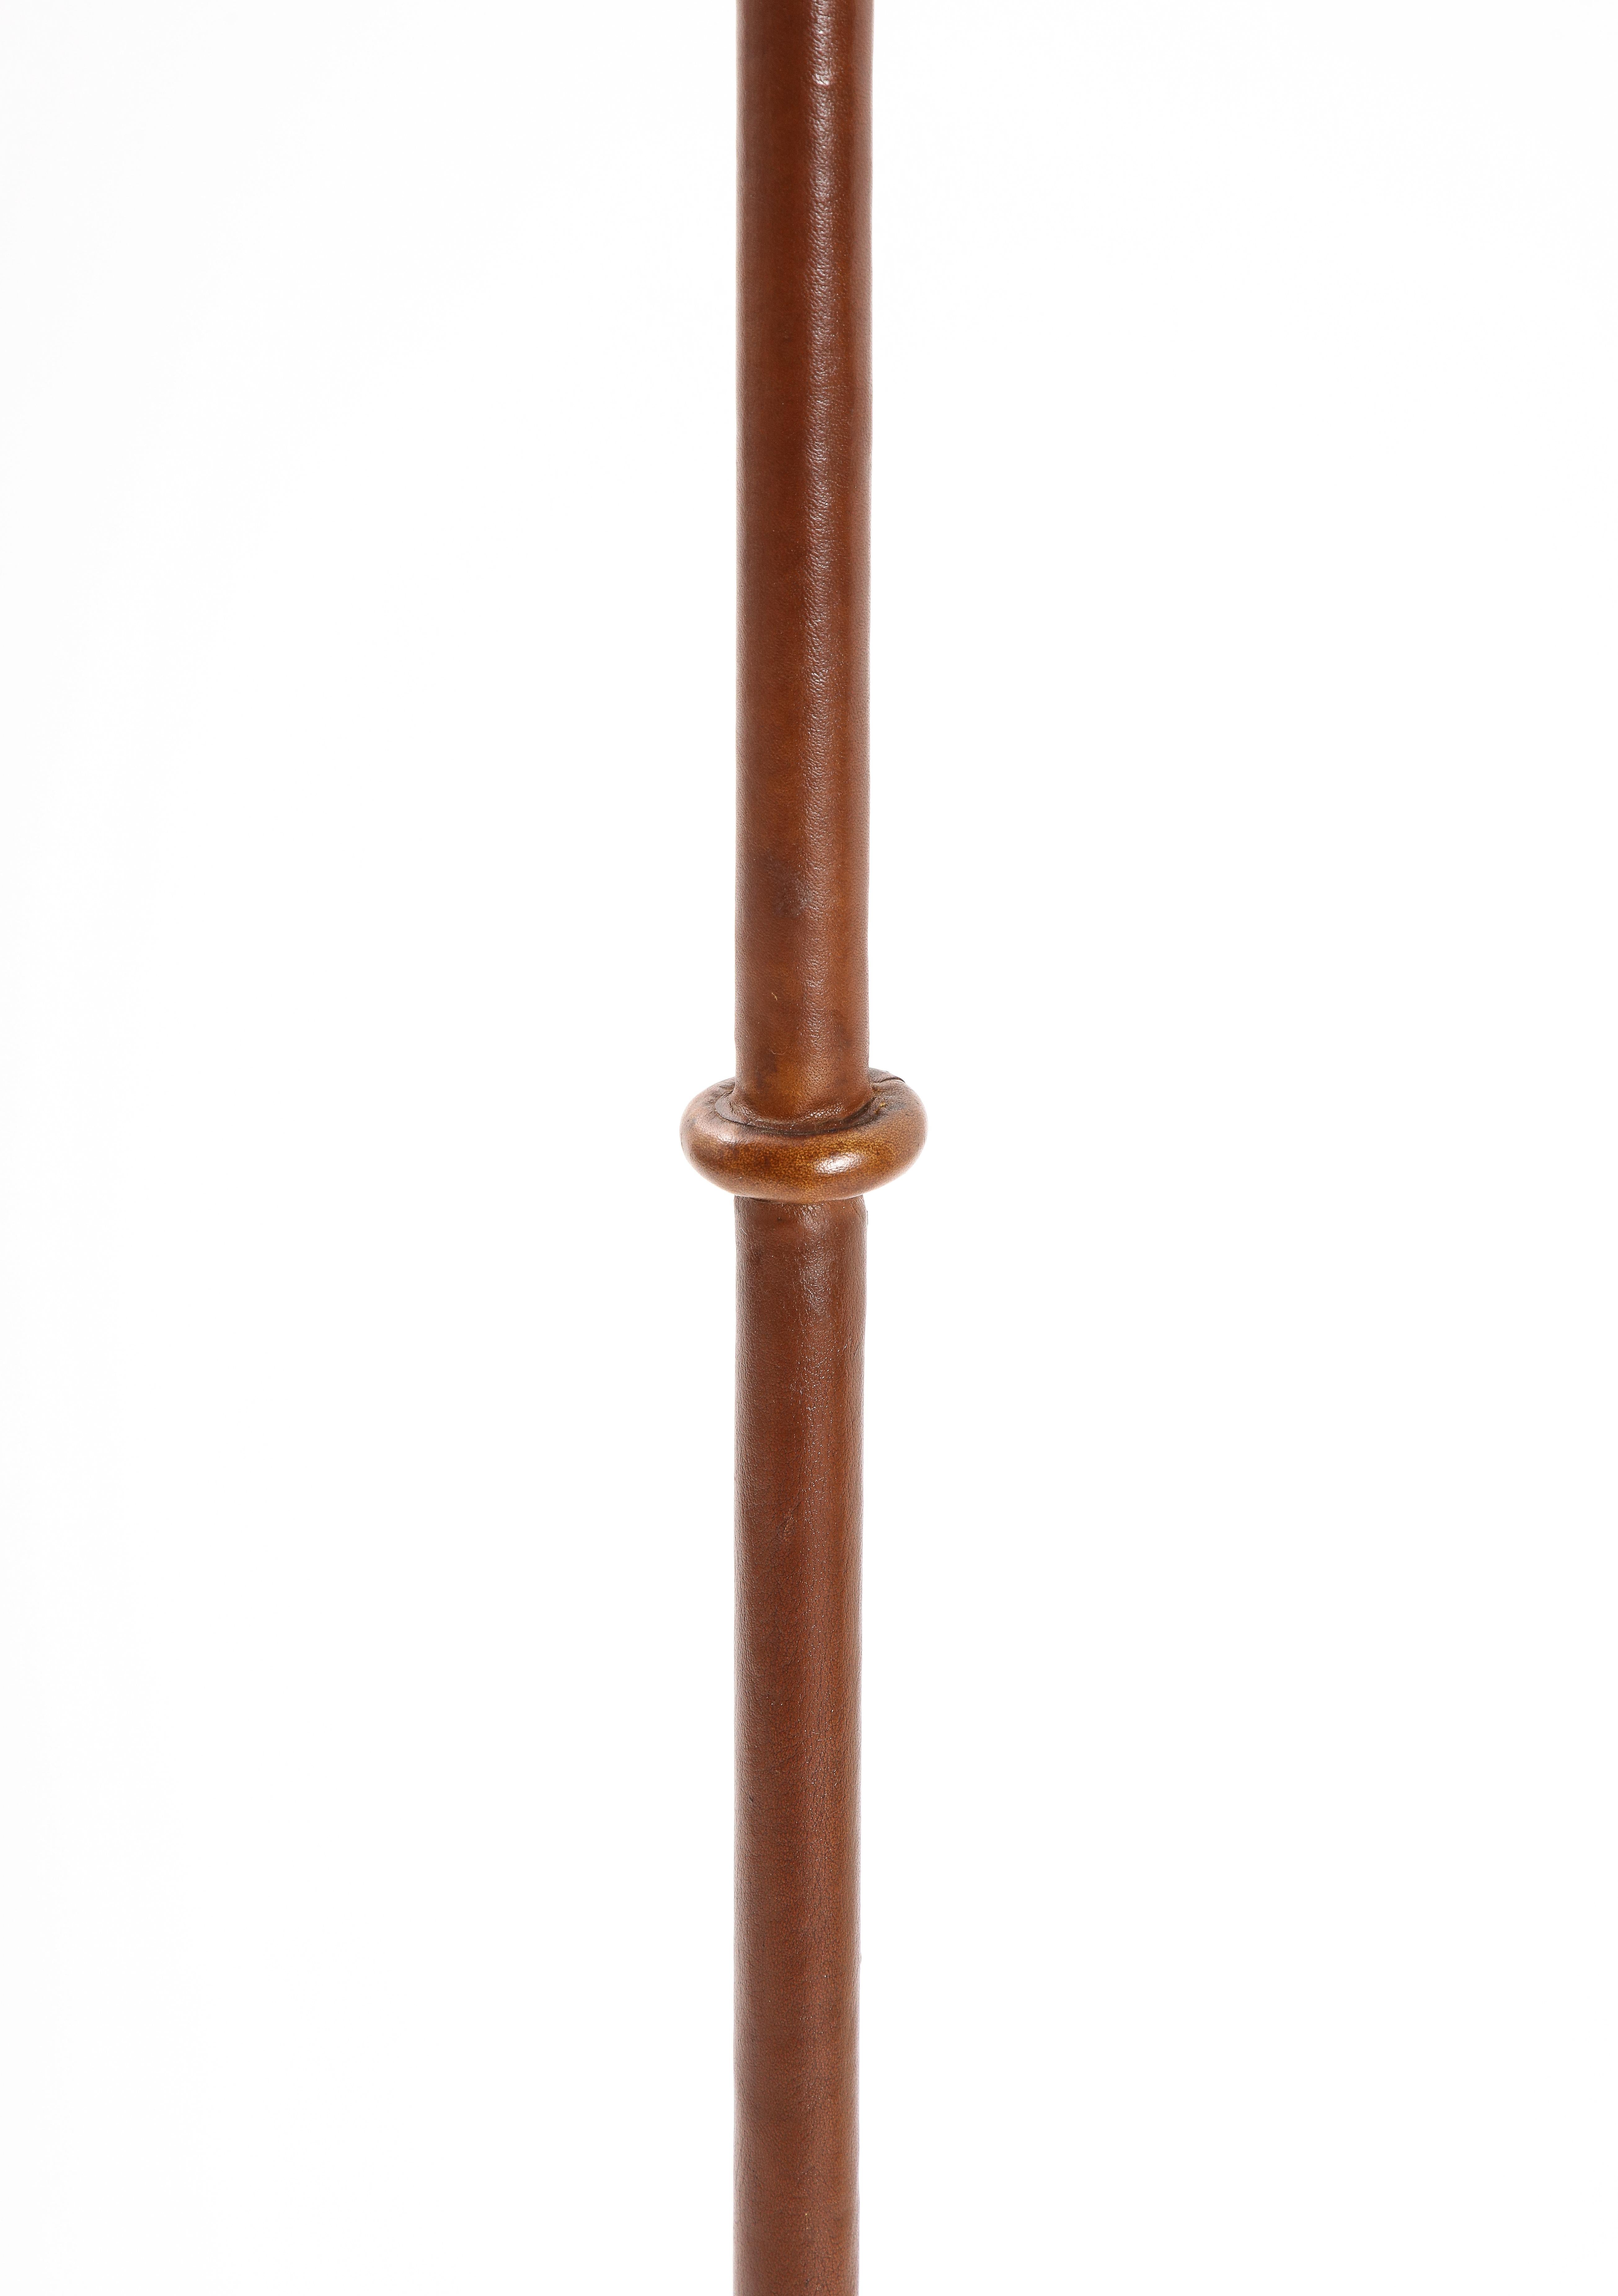 Leather stitched reading reading lamp with excellent patina, rewired.